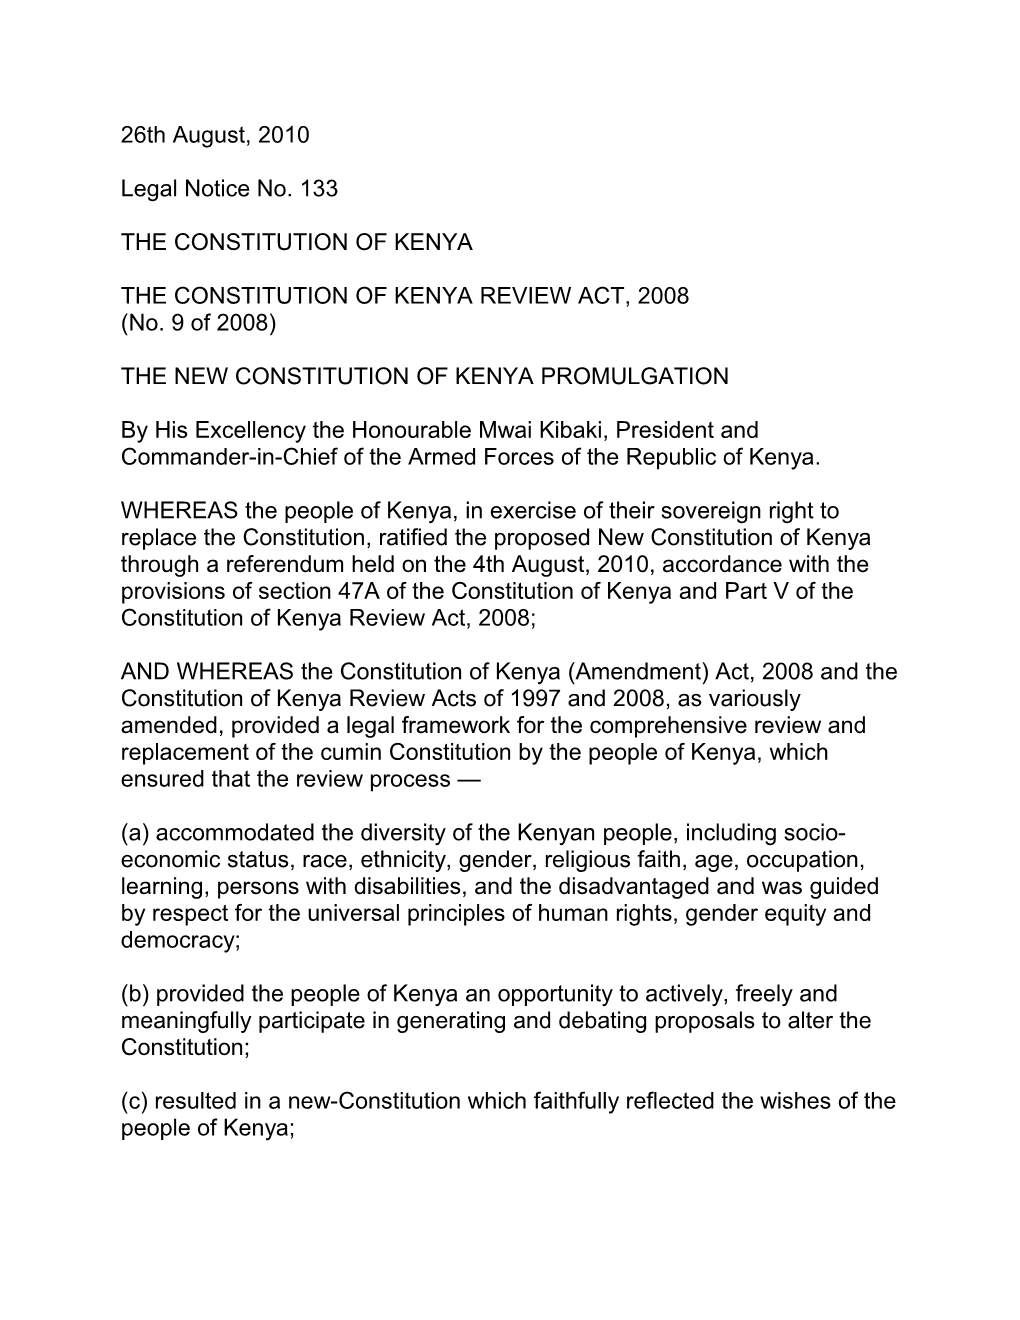 The Constitution of Kenya Review Act, 2008